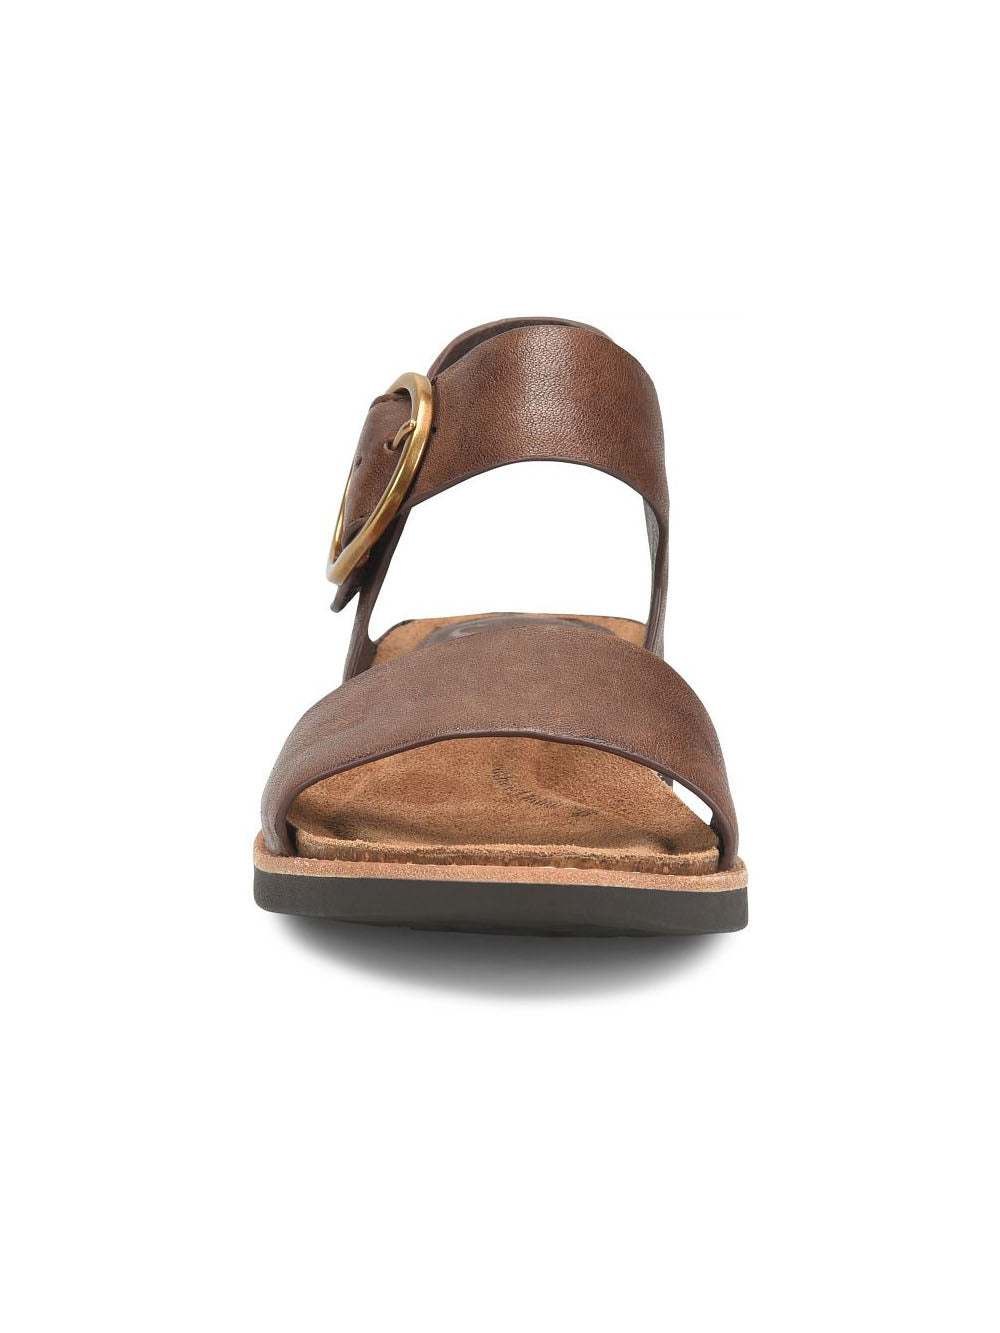 sofft shoes bali hook loop strap sandal in cocoa brown